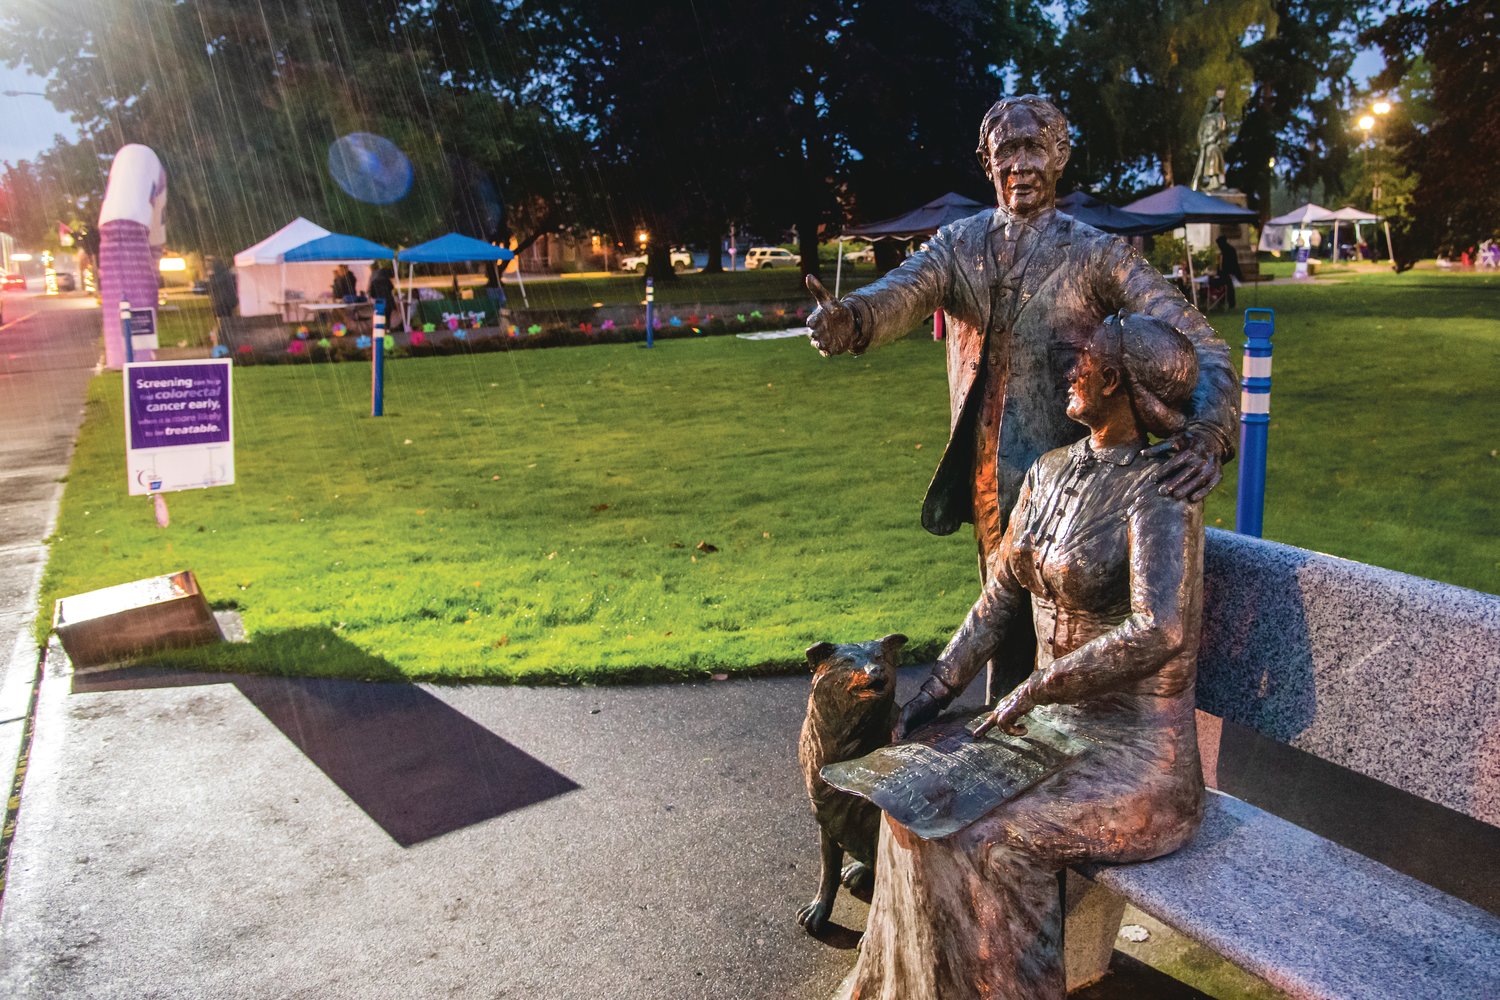 Rain pours at George Washington Park in Centralia Saturday night during a Relay For Life event Saturday night.